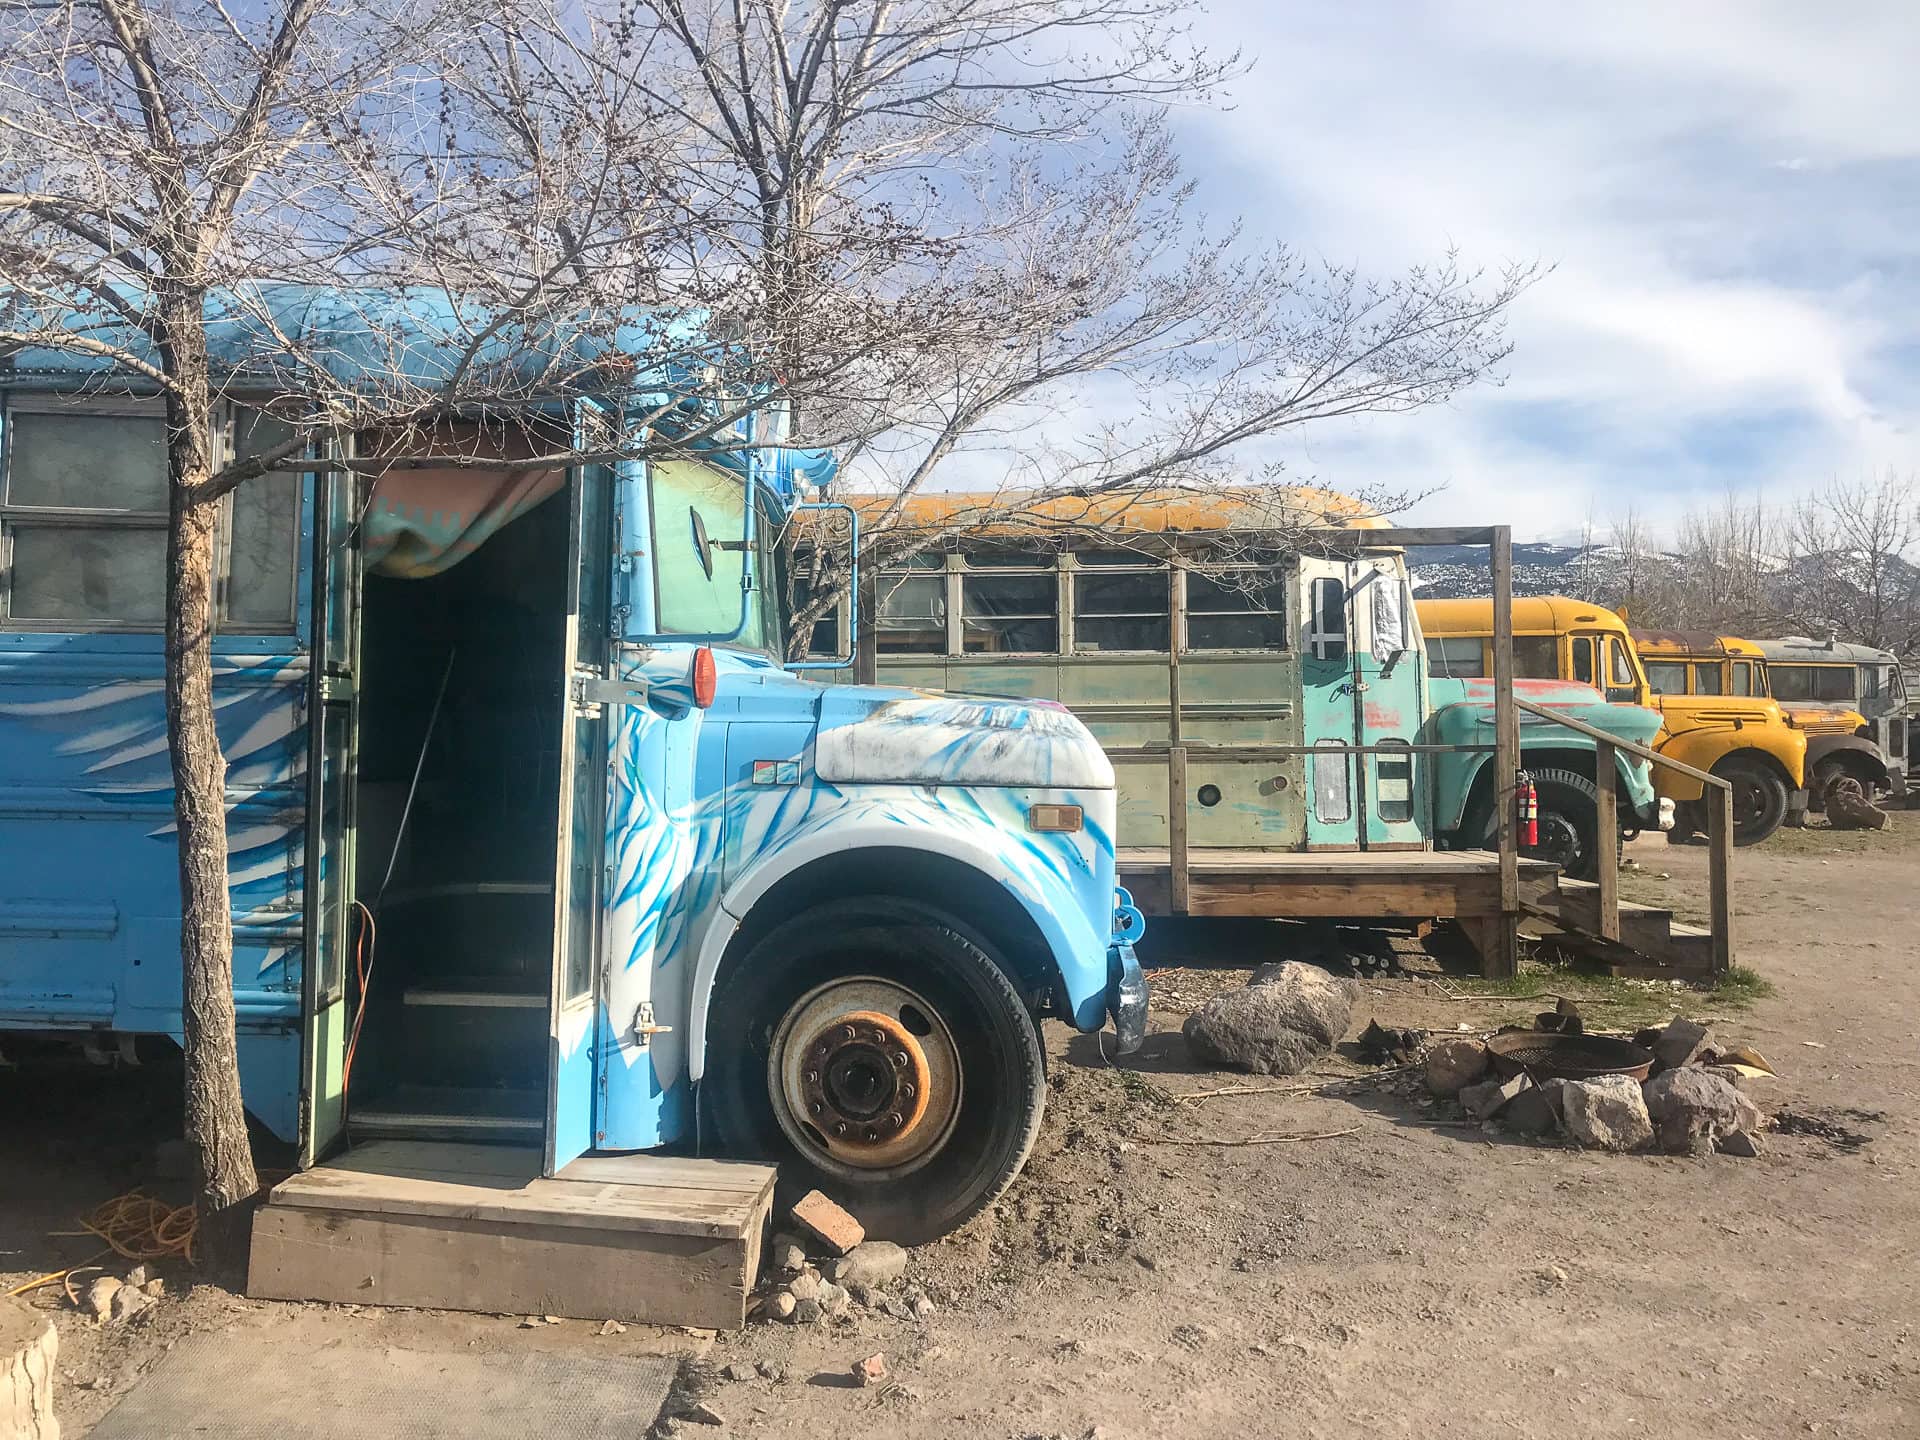 You can stay in one of six converted and restored school buses.